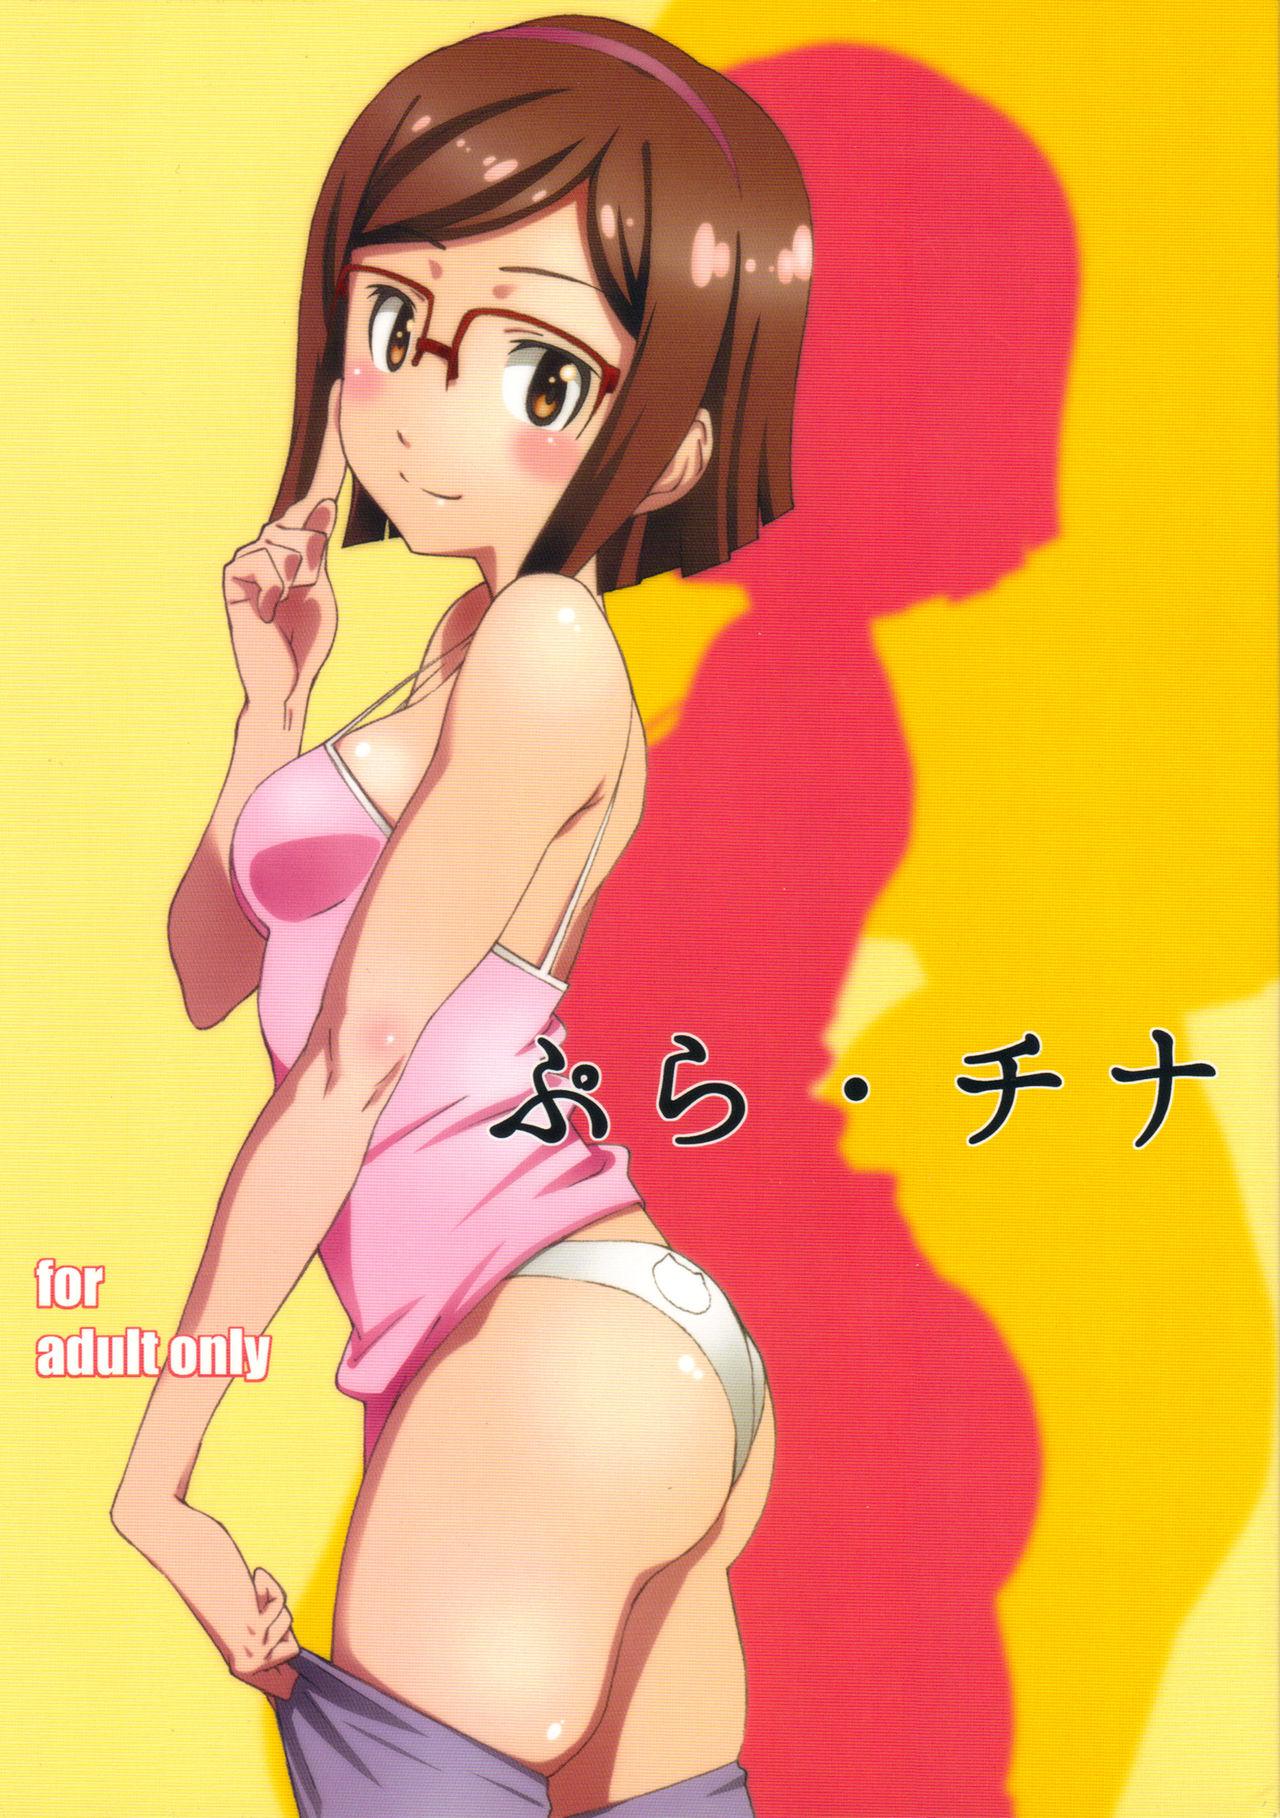 Oldvsyoung Pla-China - Gundam build fighters Caliente - Page 1